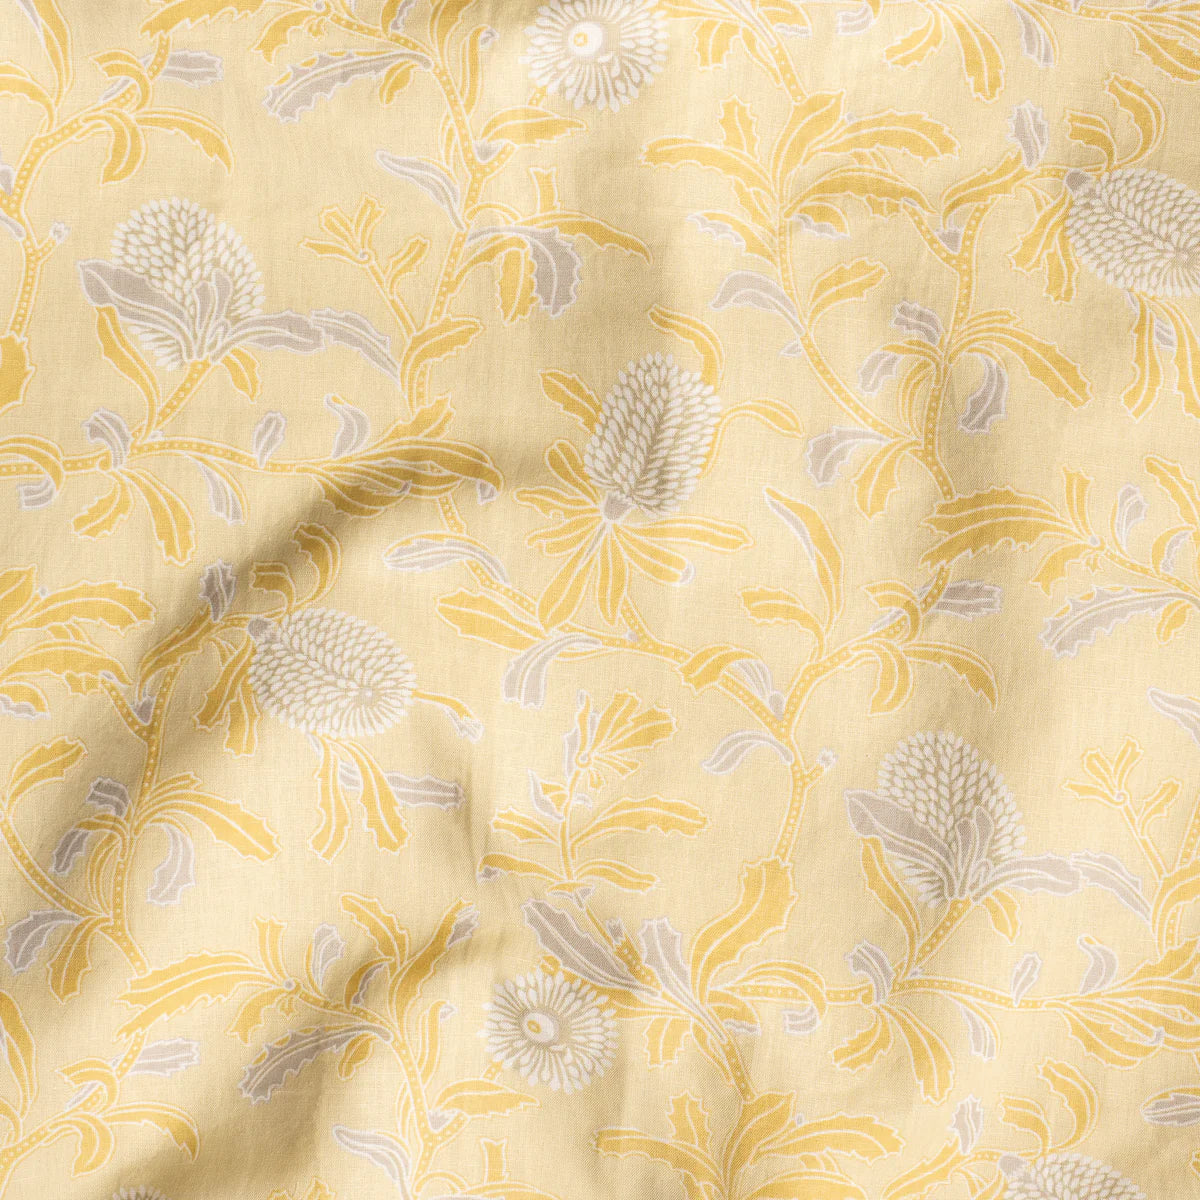 Draped fabric in a floral print in shades of gray and yellow on a light yellow field.